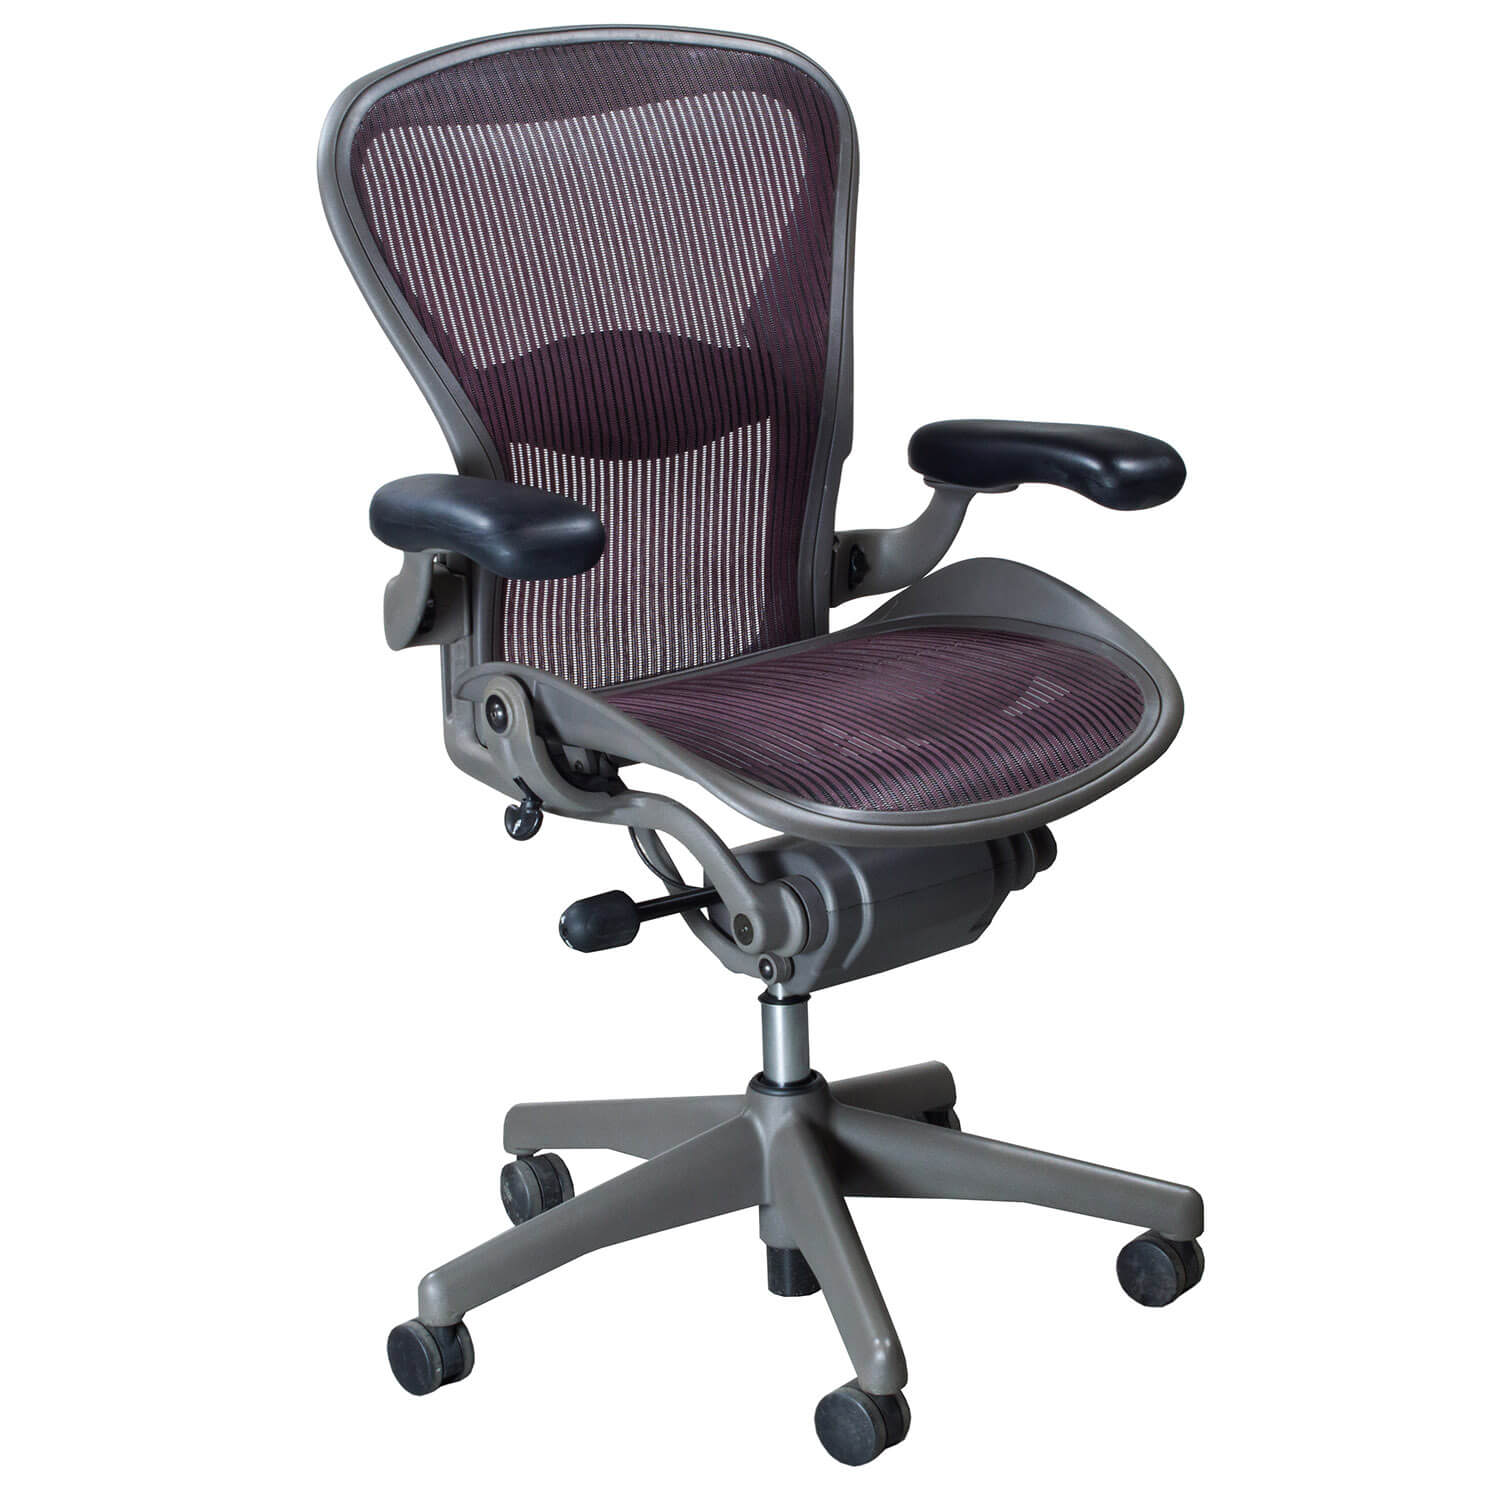 Aeron Chair - Second Hand Office Chairs - Used Office Furniture